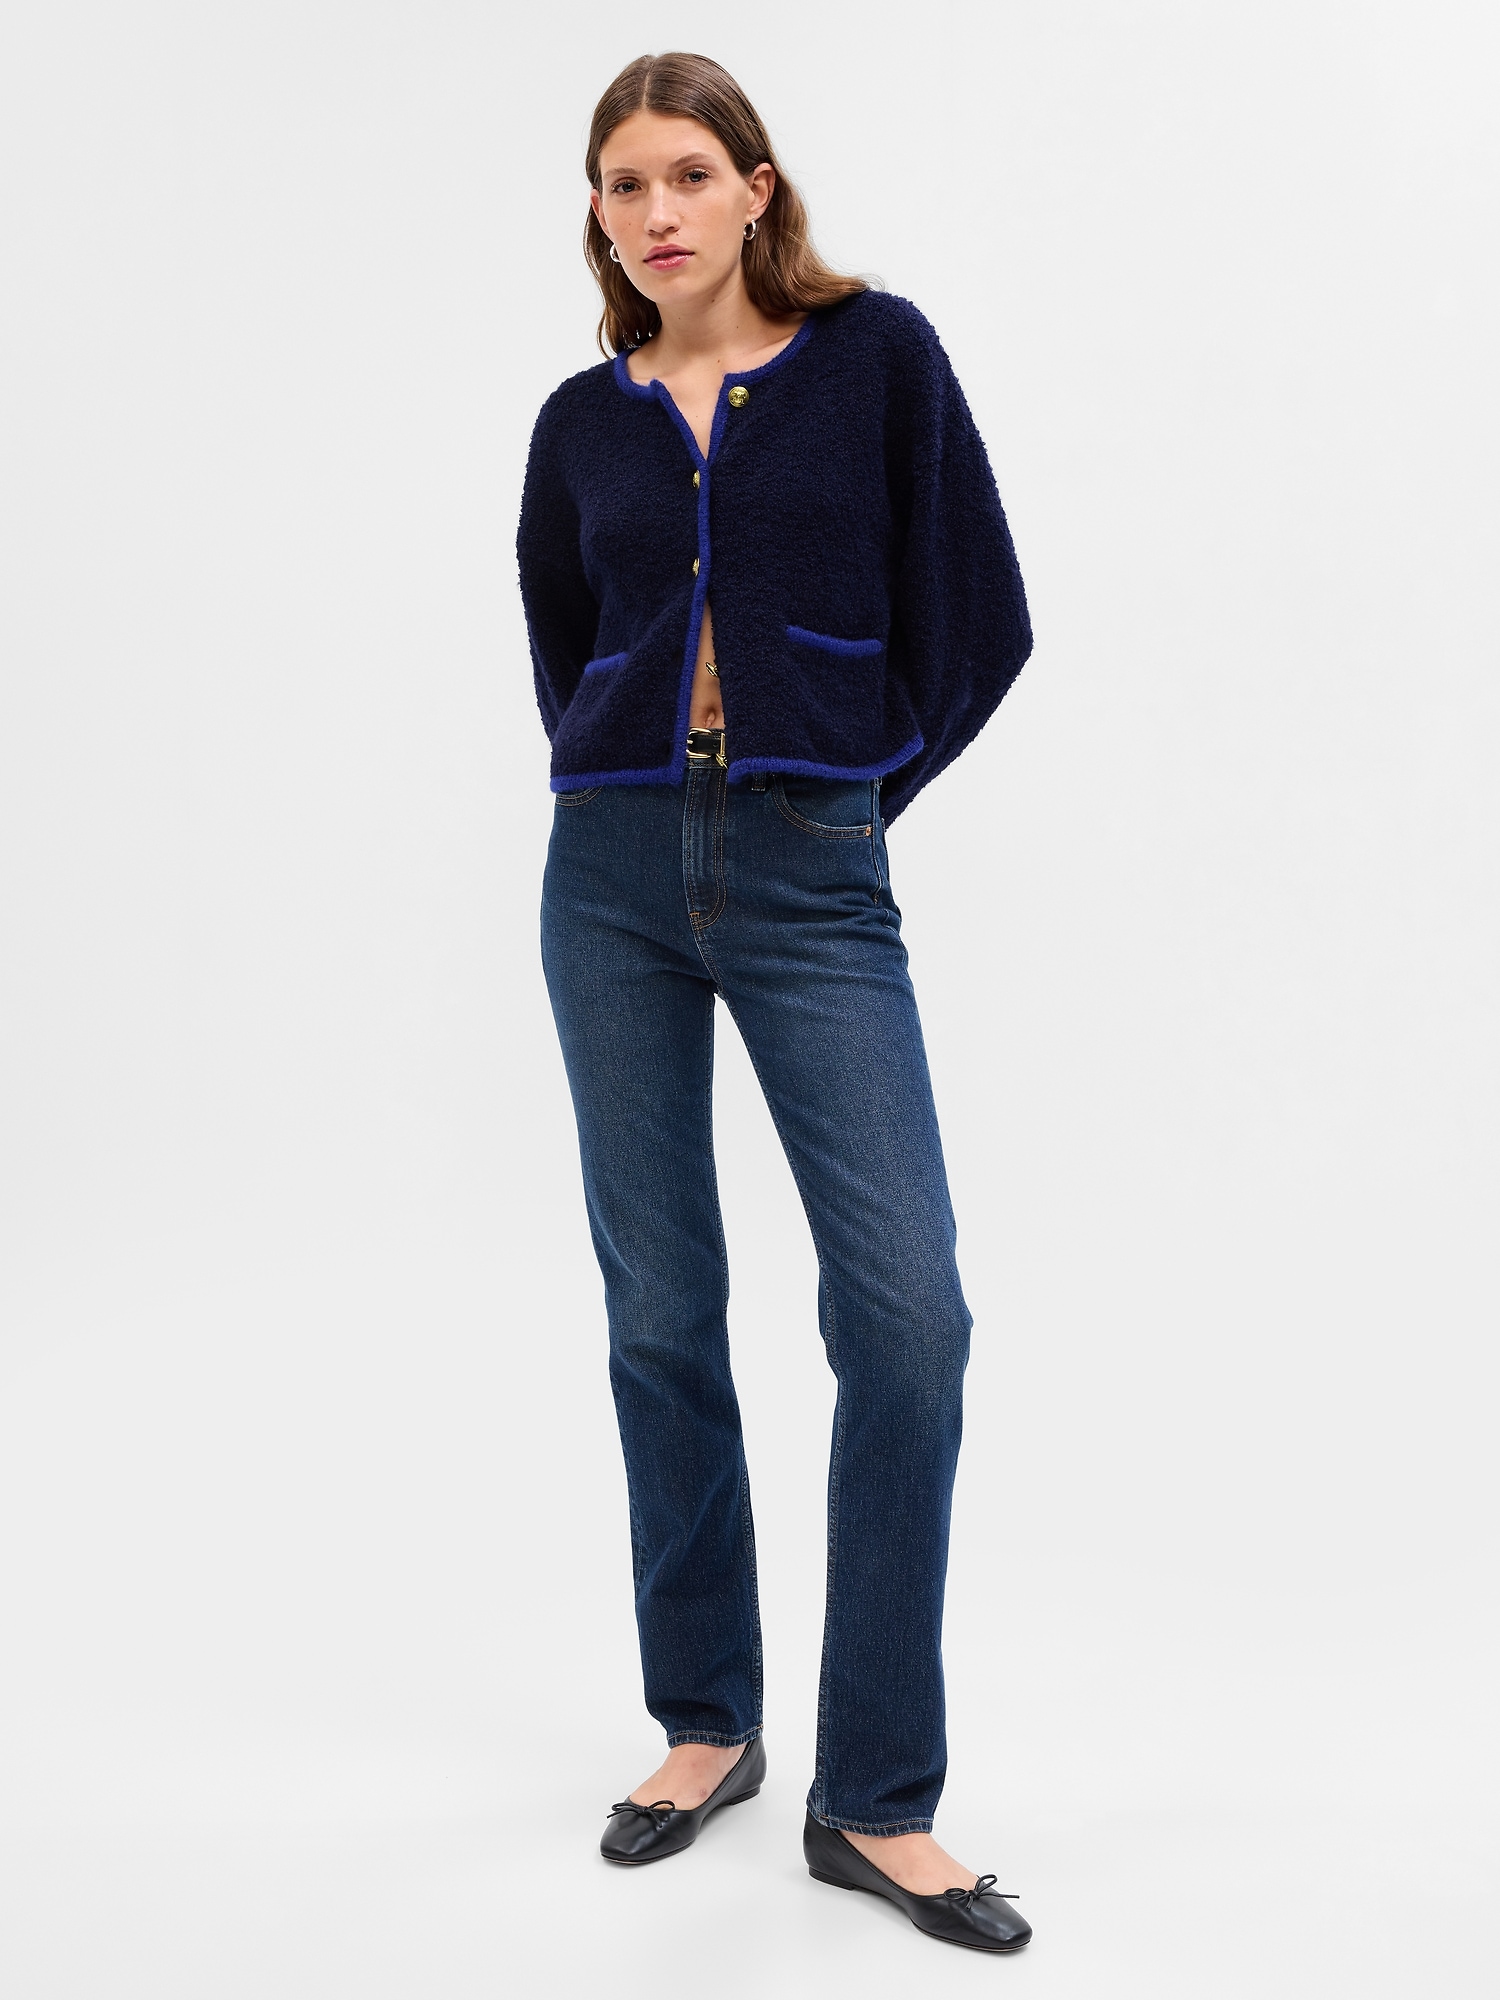 Gap Recycled Cropped Sweater Cardigan In Navy Blue